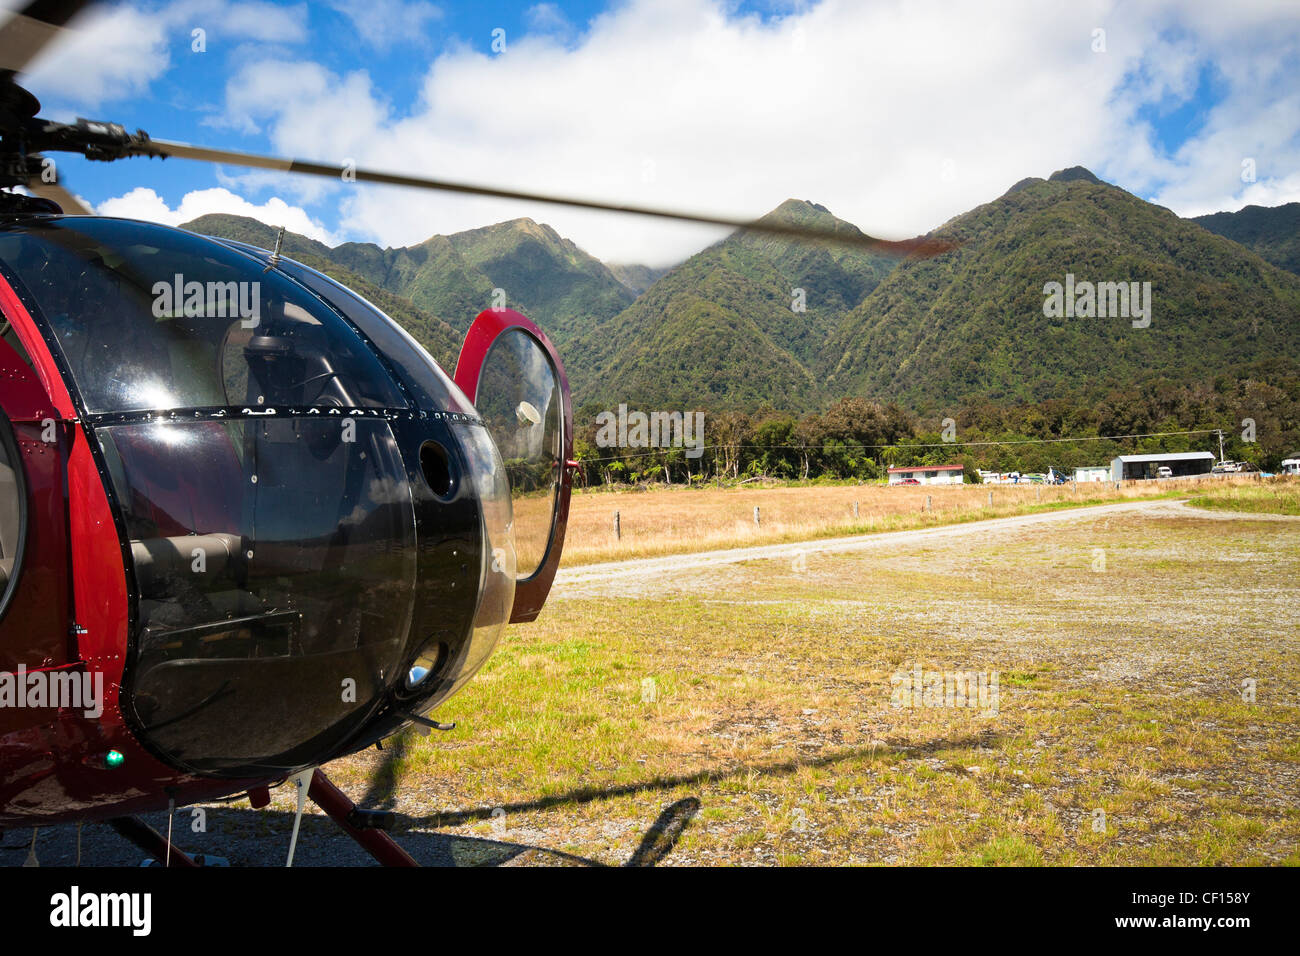 Detail of mountain helicopter and landscape in Fox Glacier, Southern Alps, South Island, New Zealand. Stock Photo